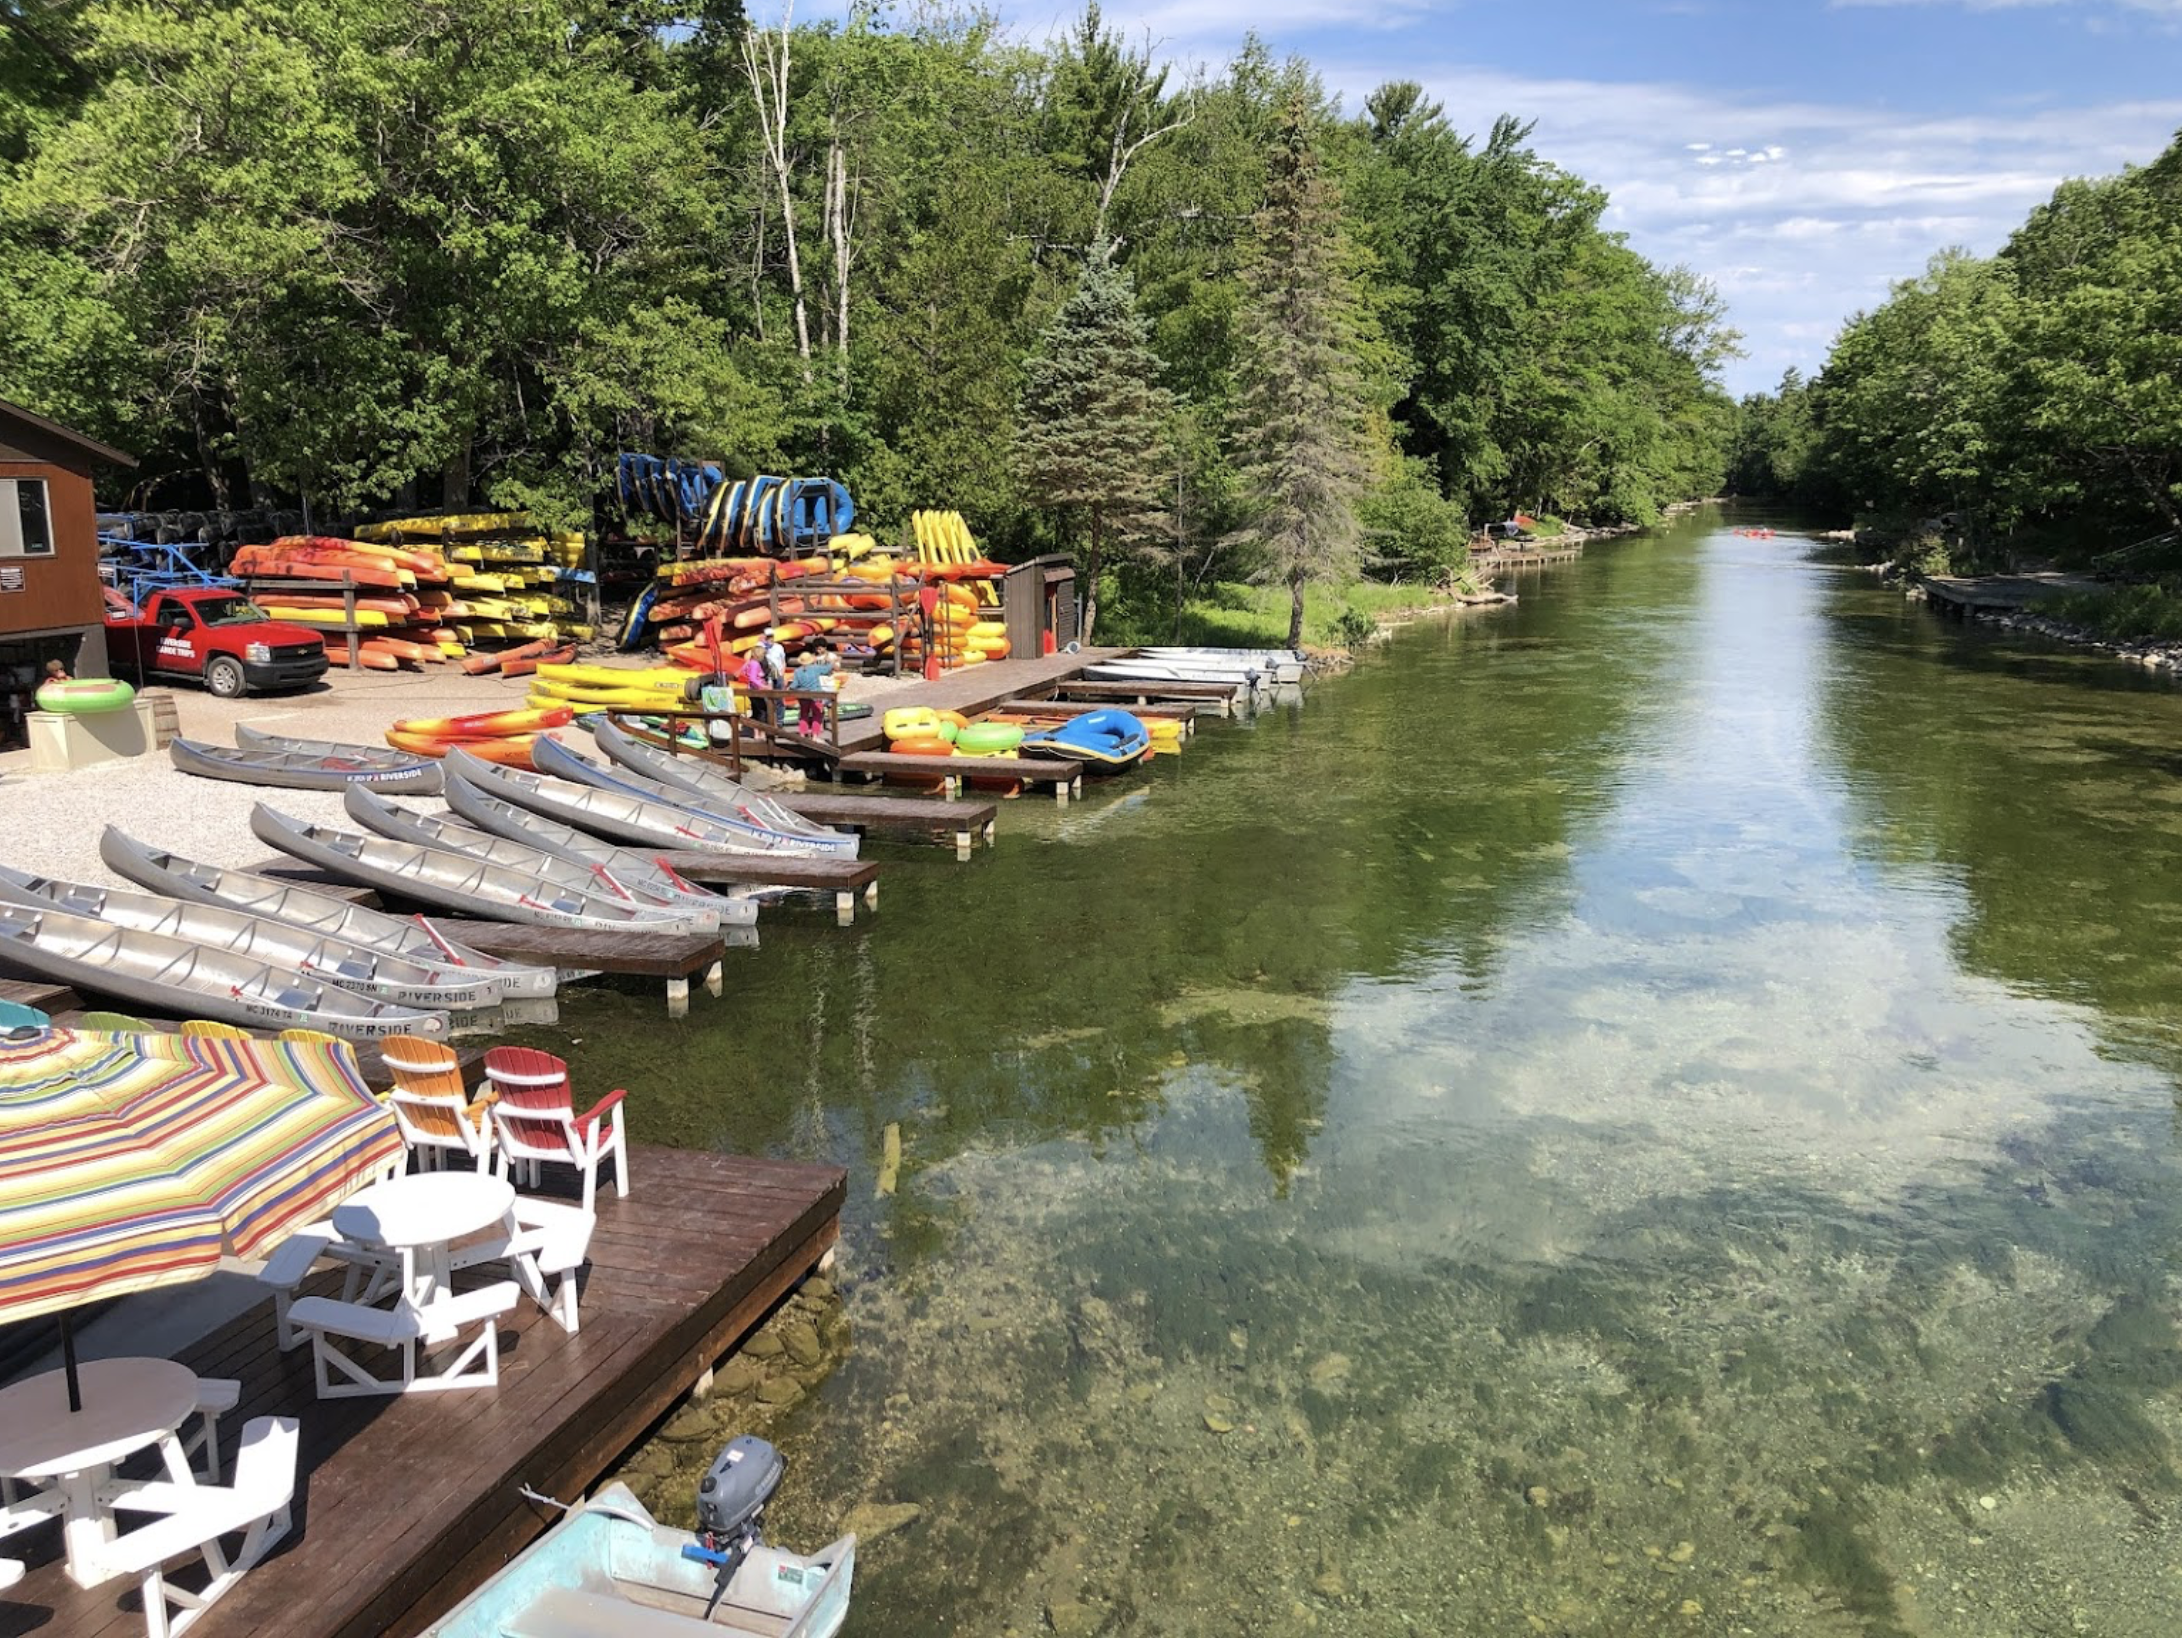 Platte River Is A Beautiful River In Michigan With Attractions Galore